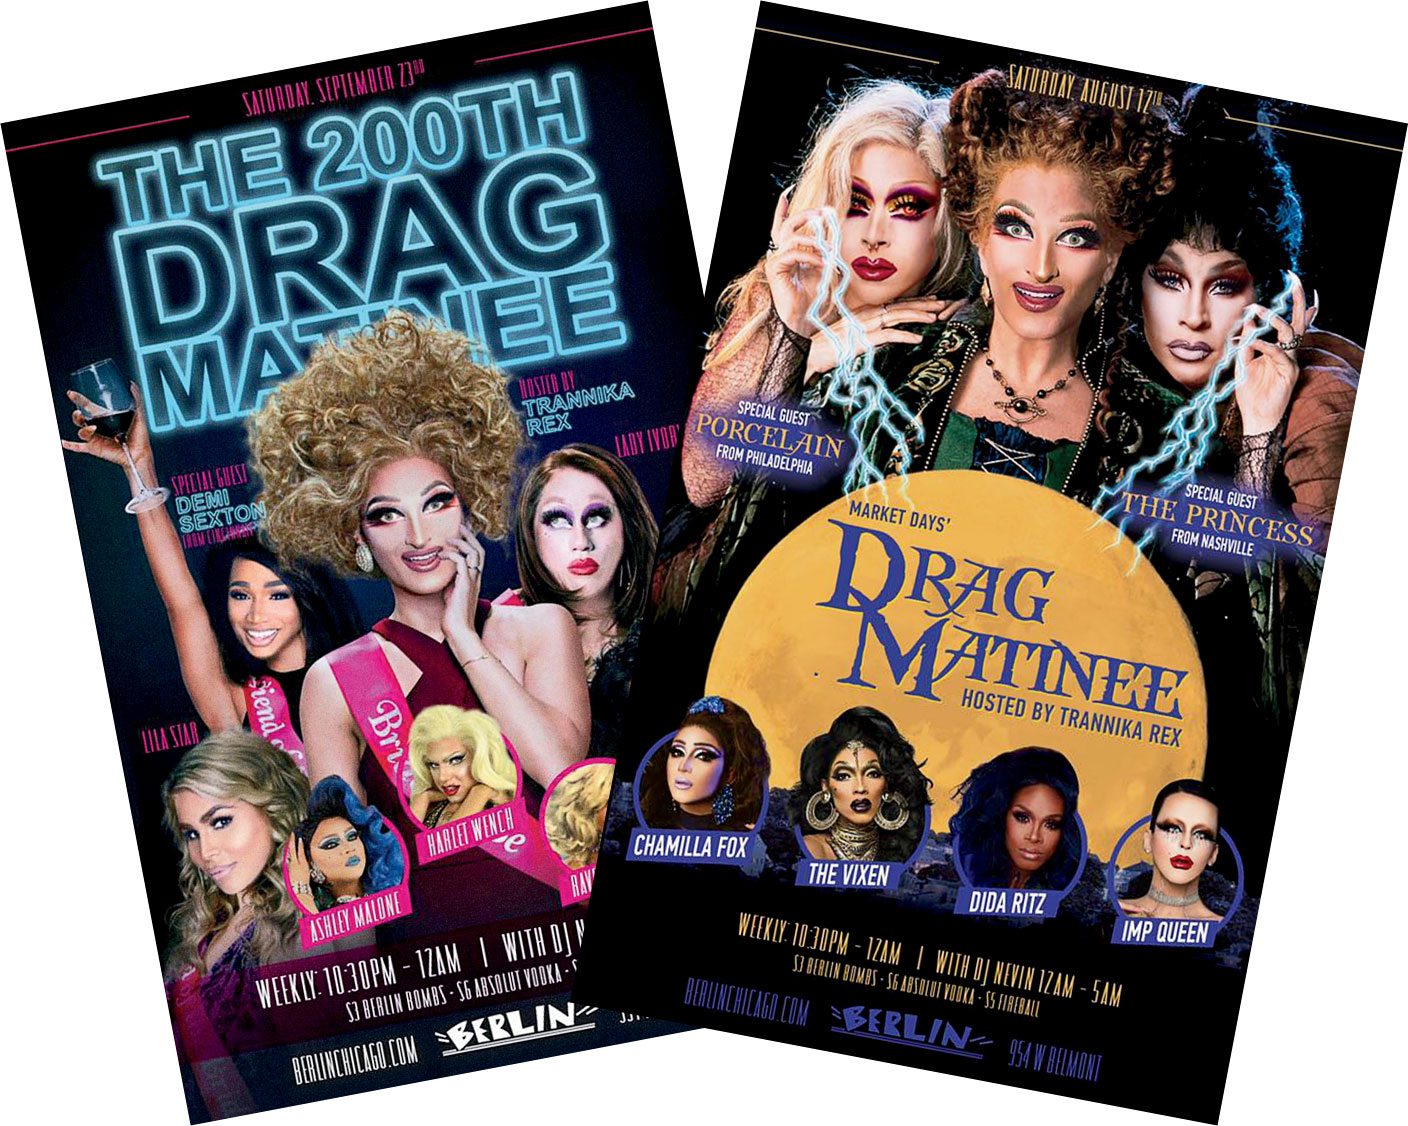 Promotional material for the T Rex–hosted Drag Matinee.